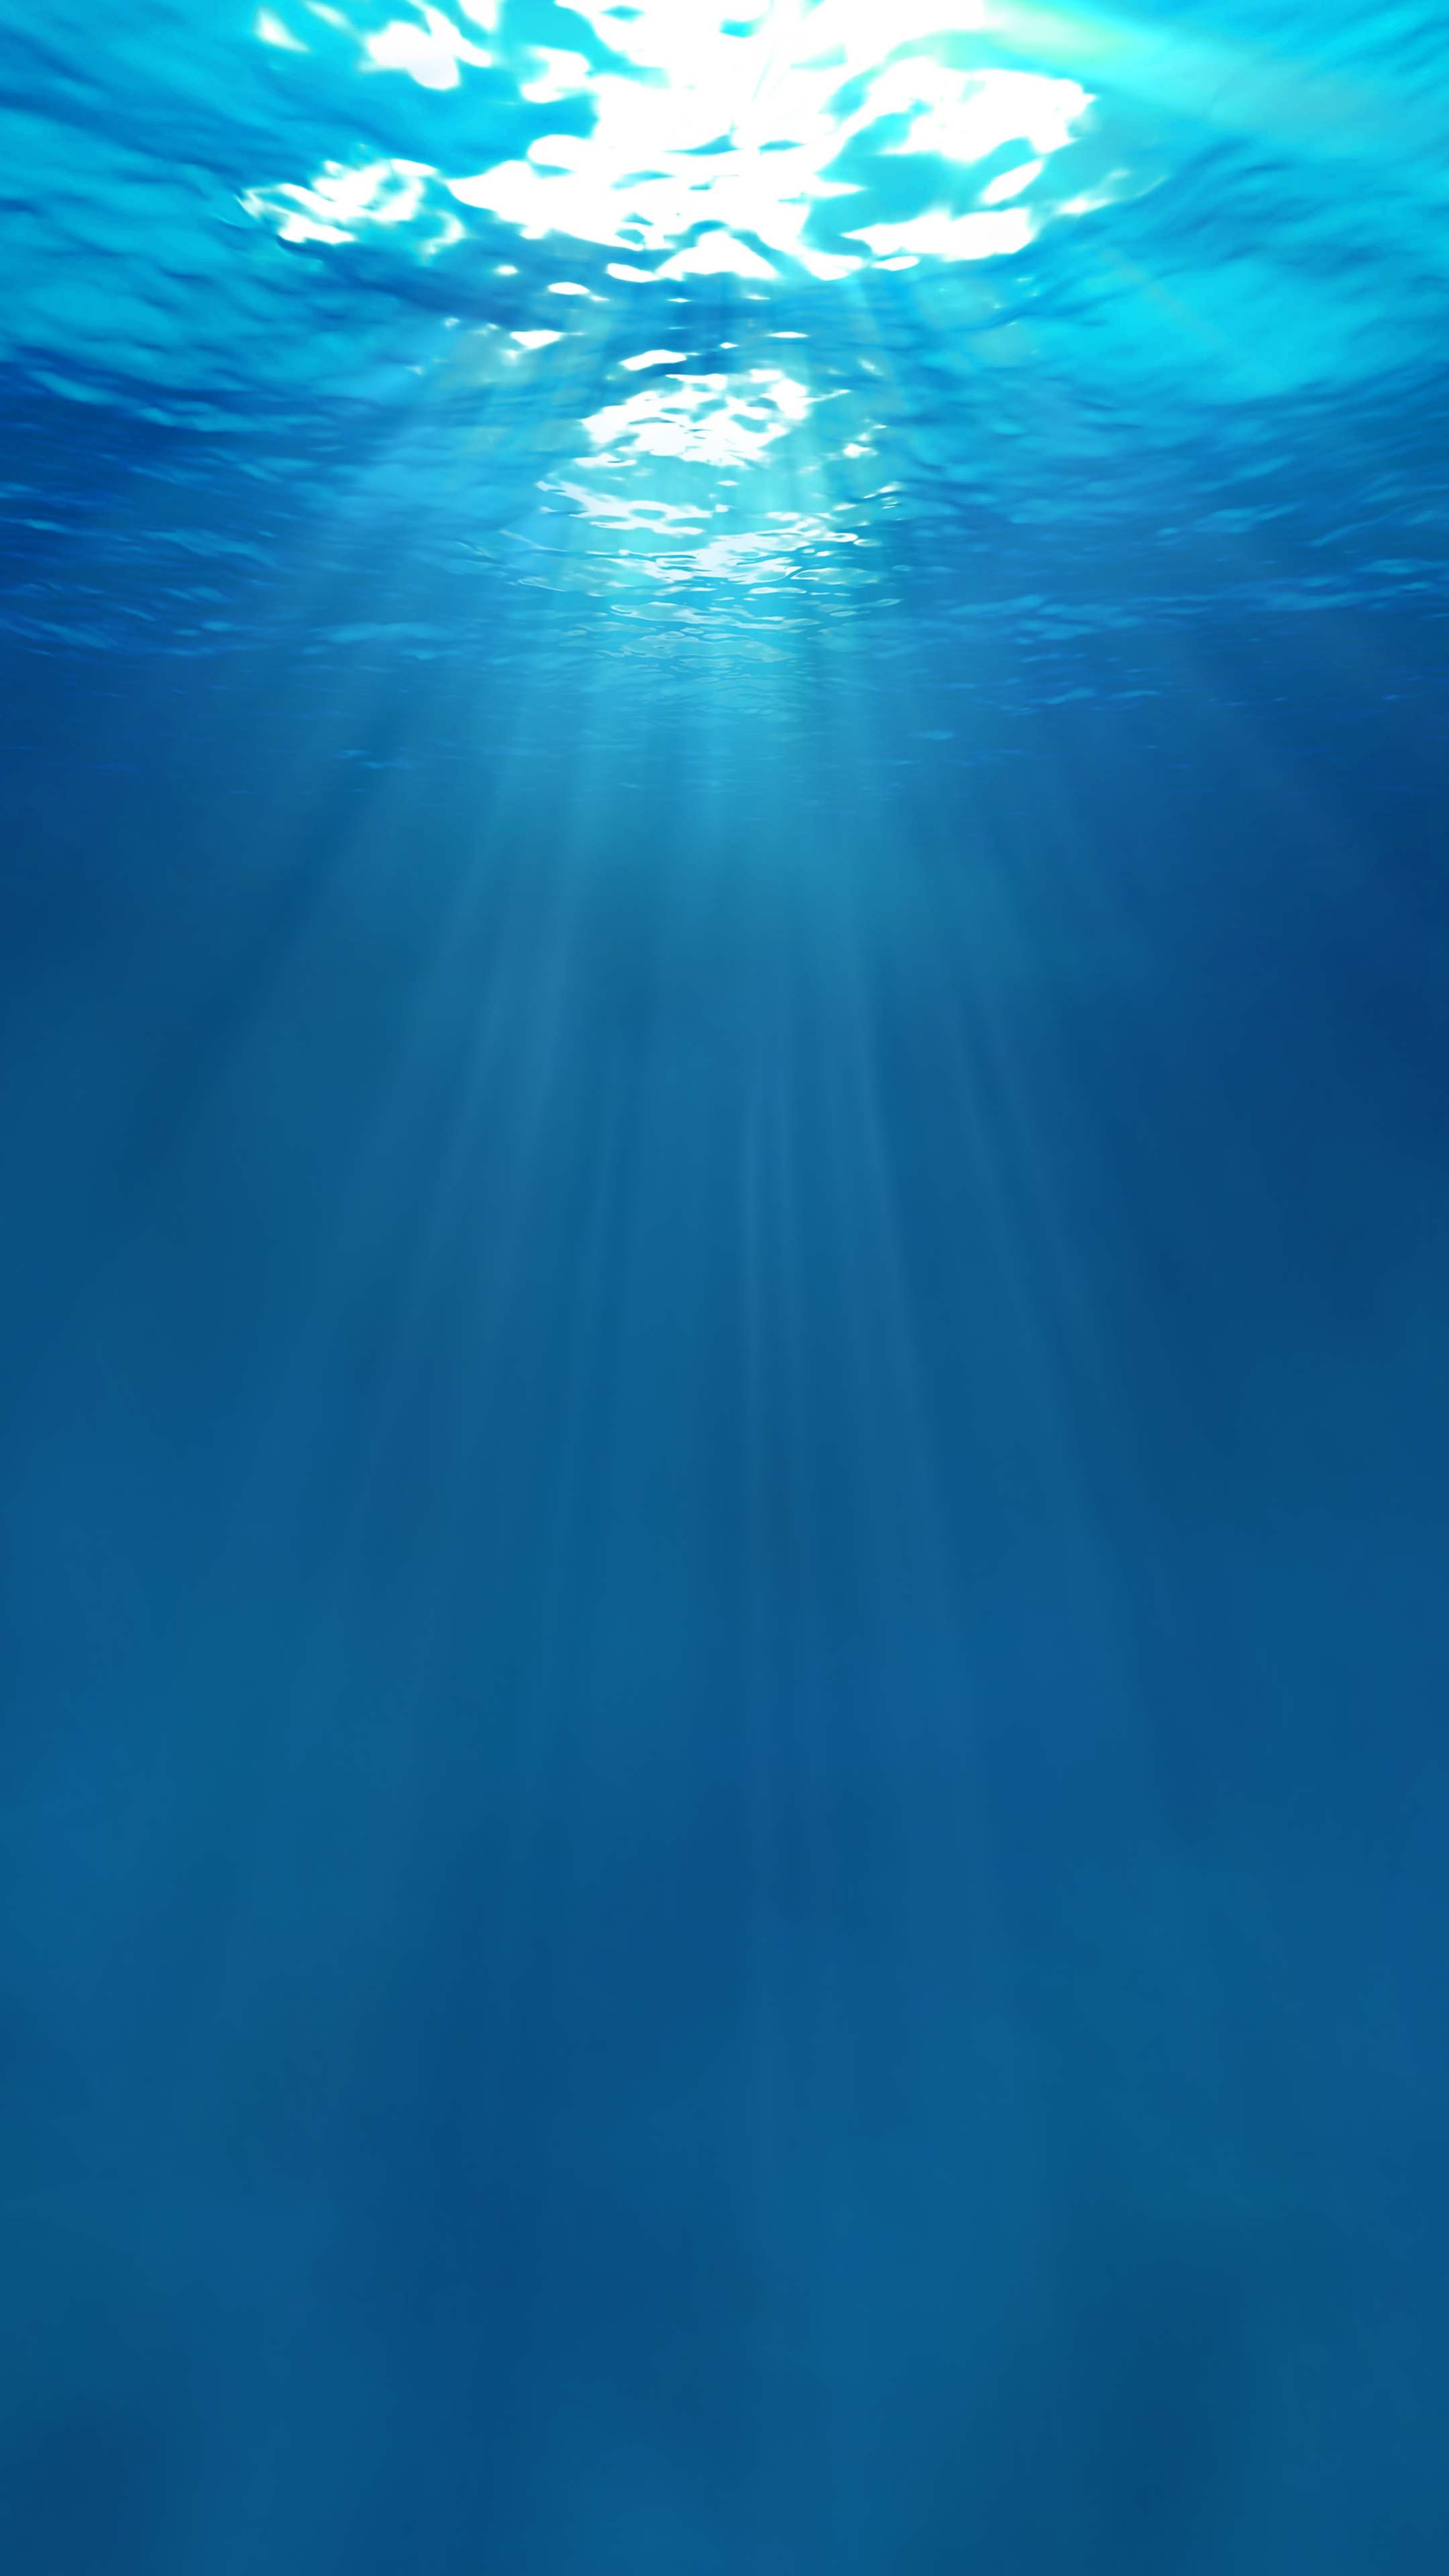 Light is inserted in the water. iPhone Wallpaper. Water aesthetic, Water, Ocean wallpaper